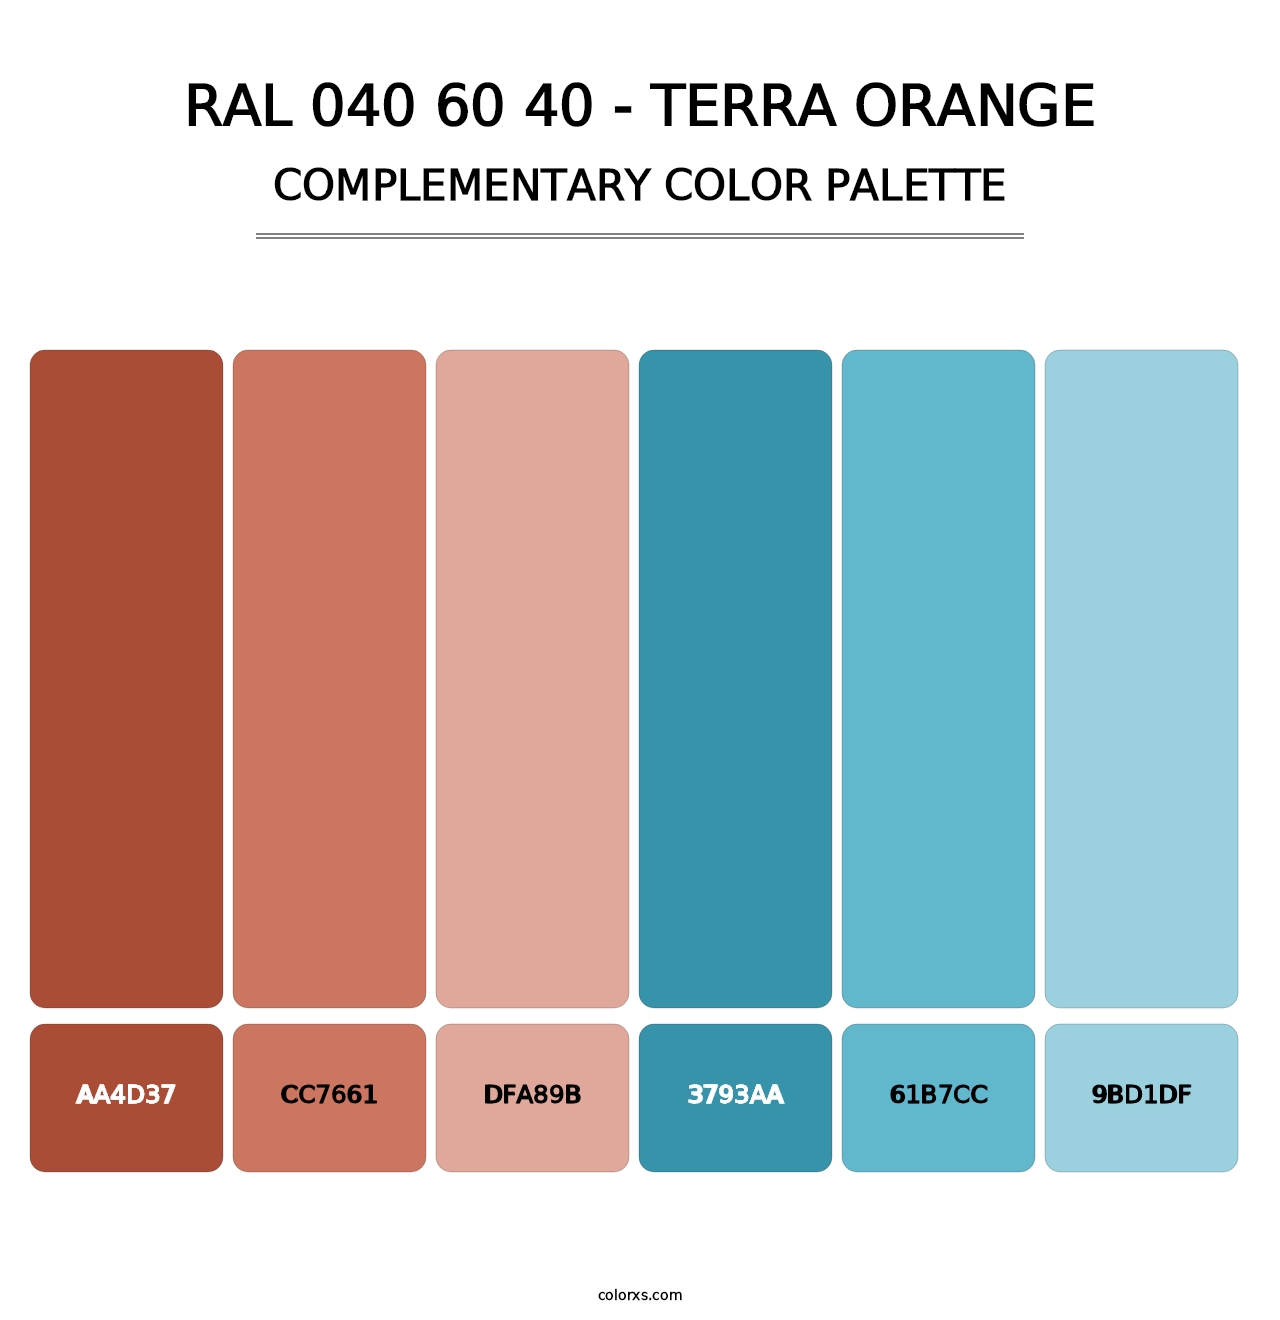 RAL 040 60 40 - Terra Orange - Complementary Color Palette